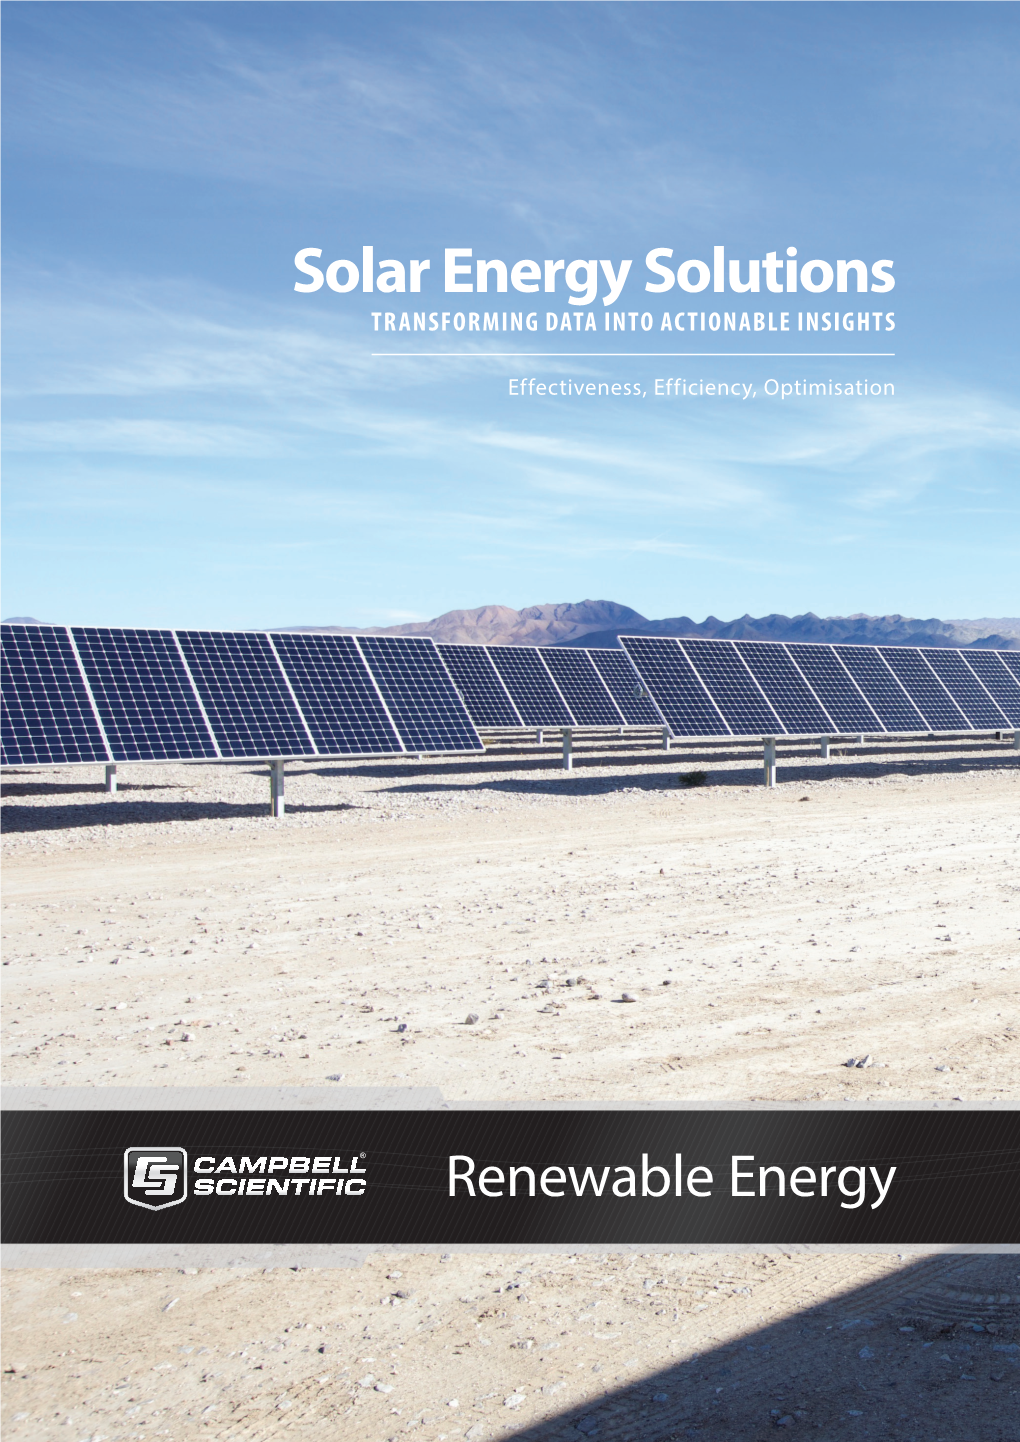 Solar Energy Solutions TRANSFORMING DATA INTO ACTIONABLE INSIGHTS